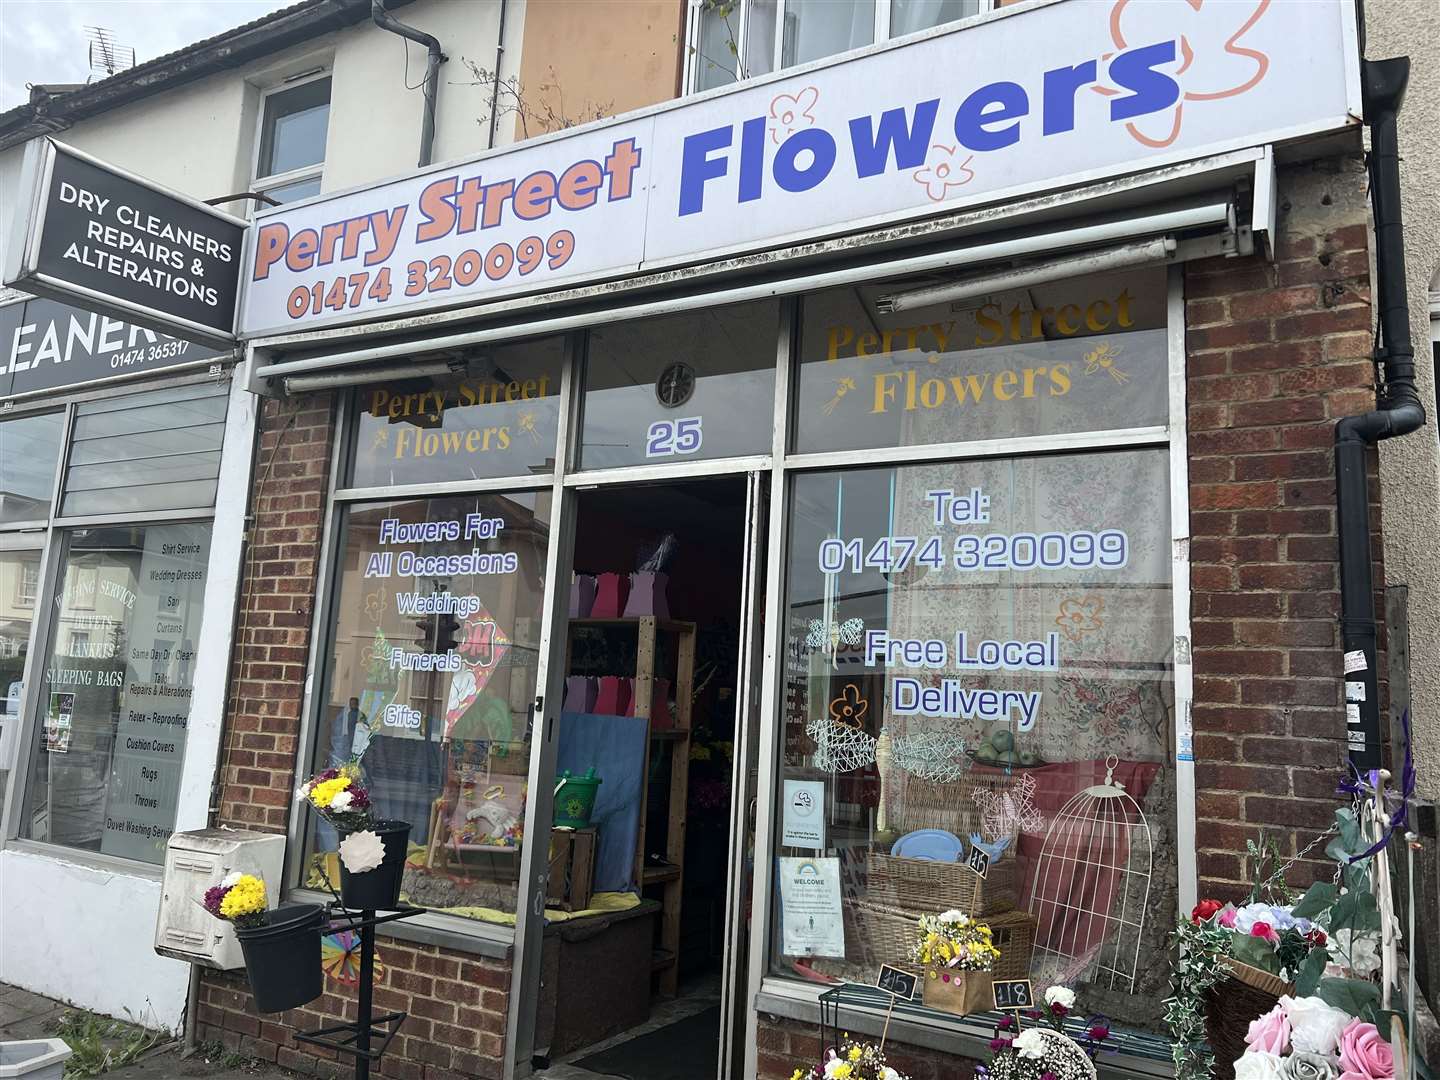 Perry Street Flowers is a florist shop in Perry Street